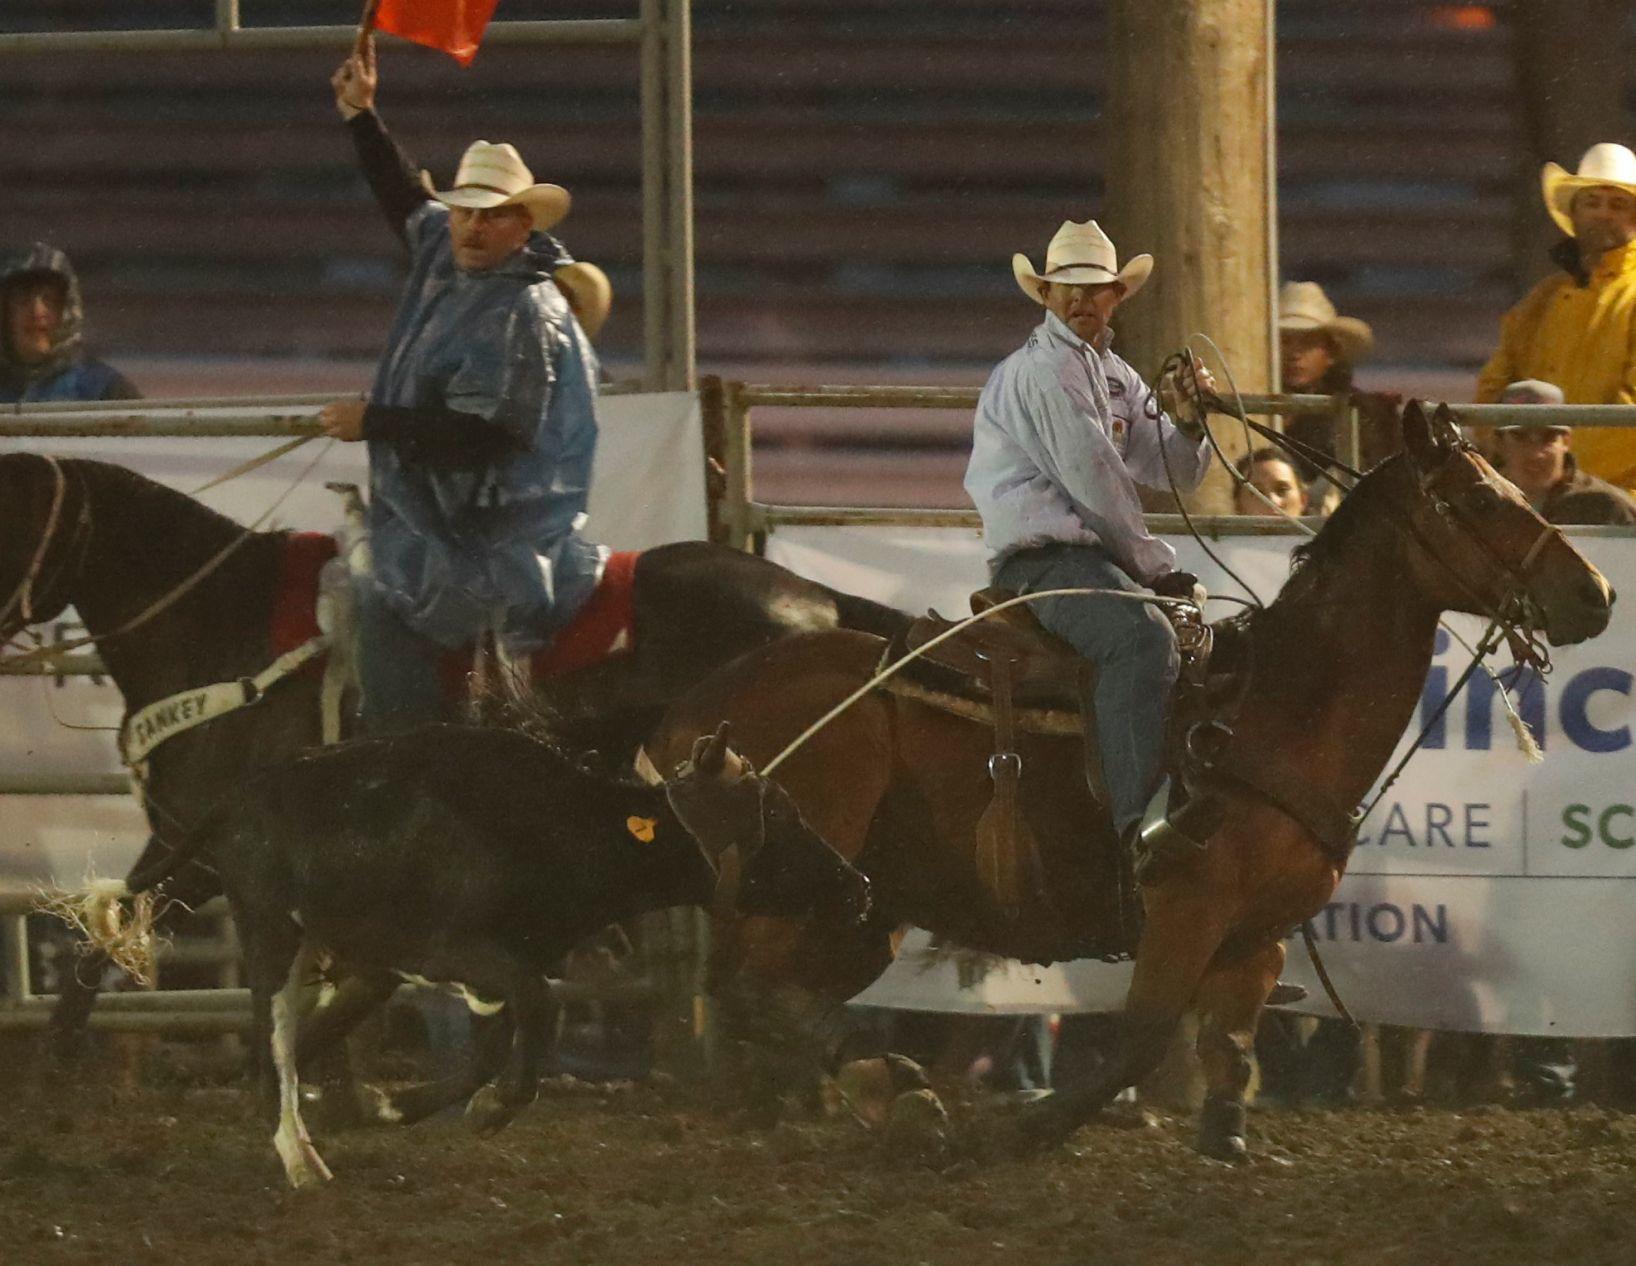 Photos Riders compete in the final night at the Yellowstone River